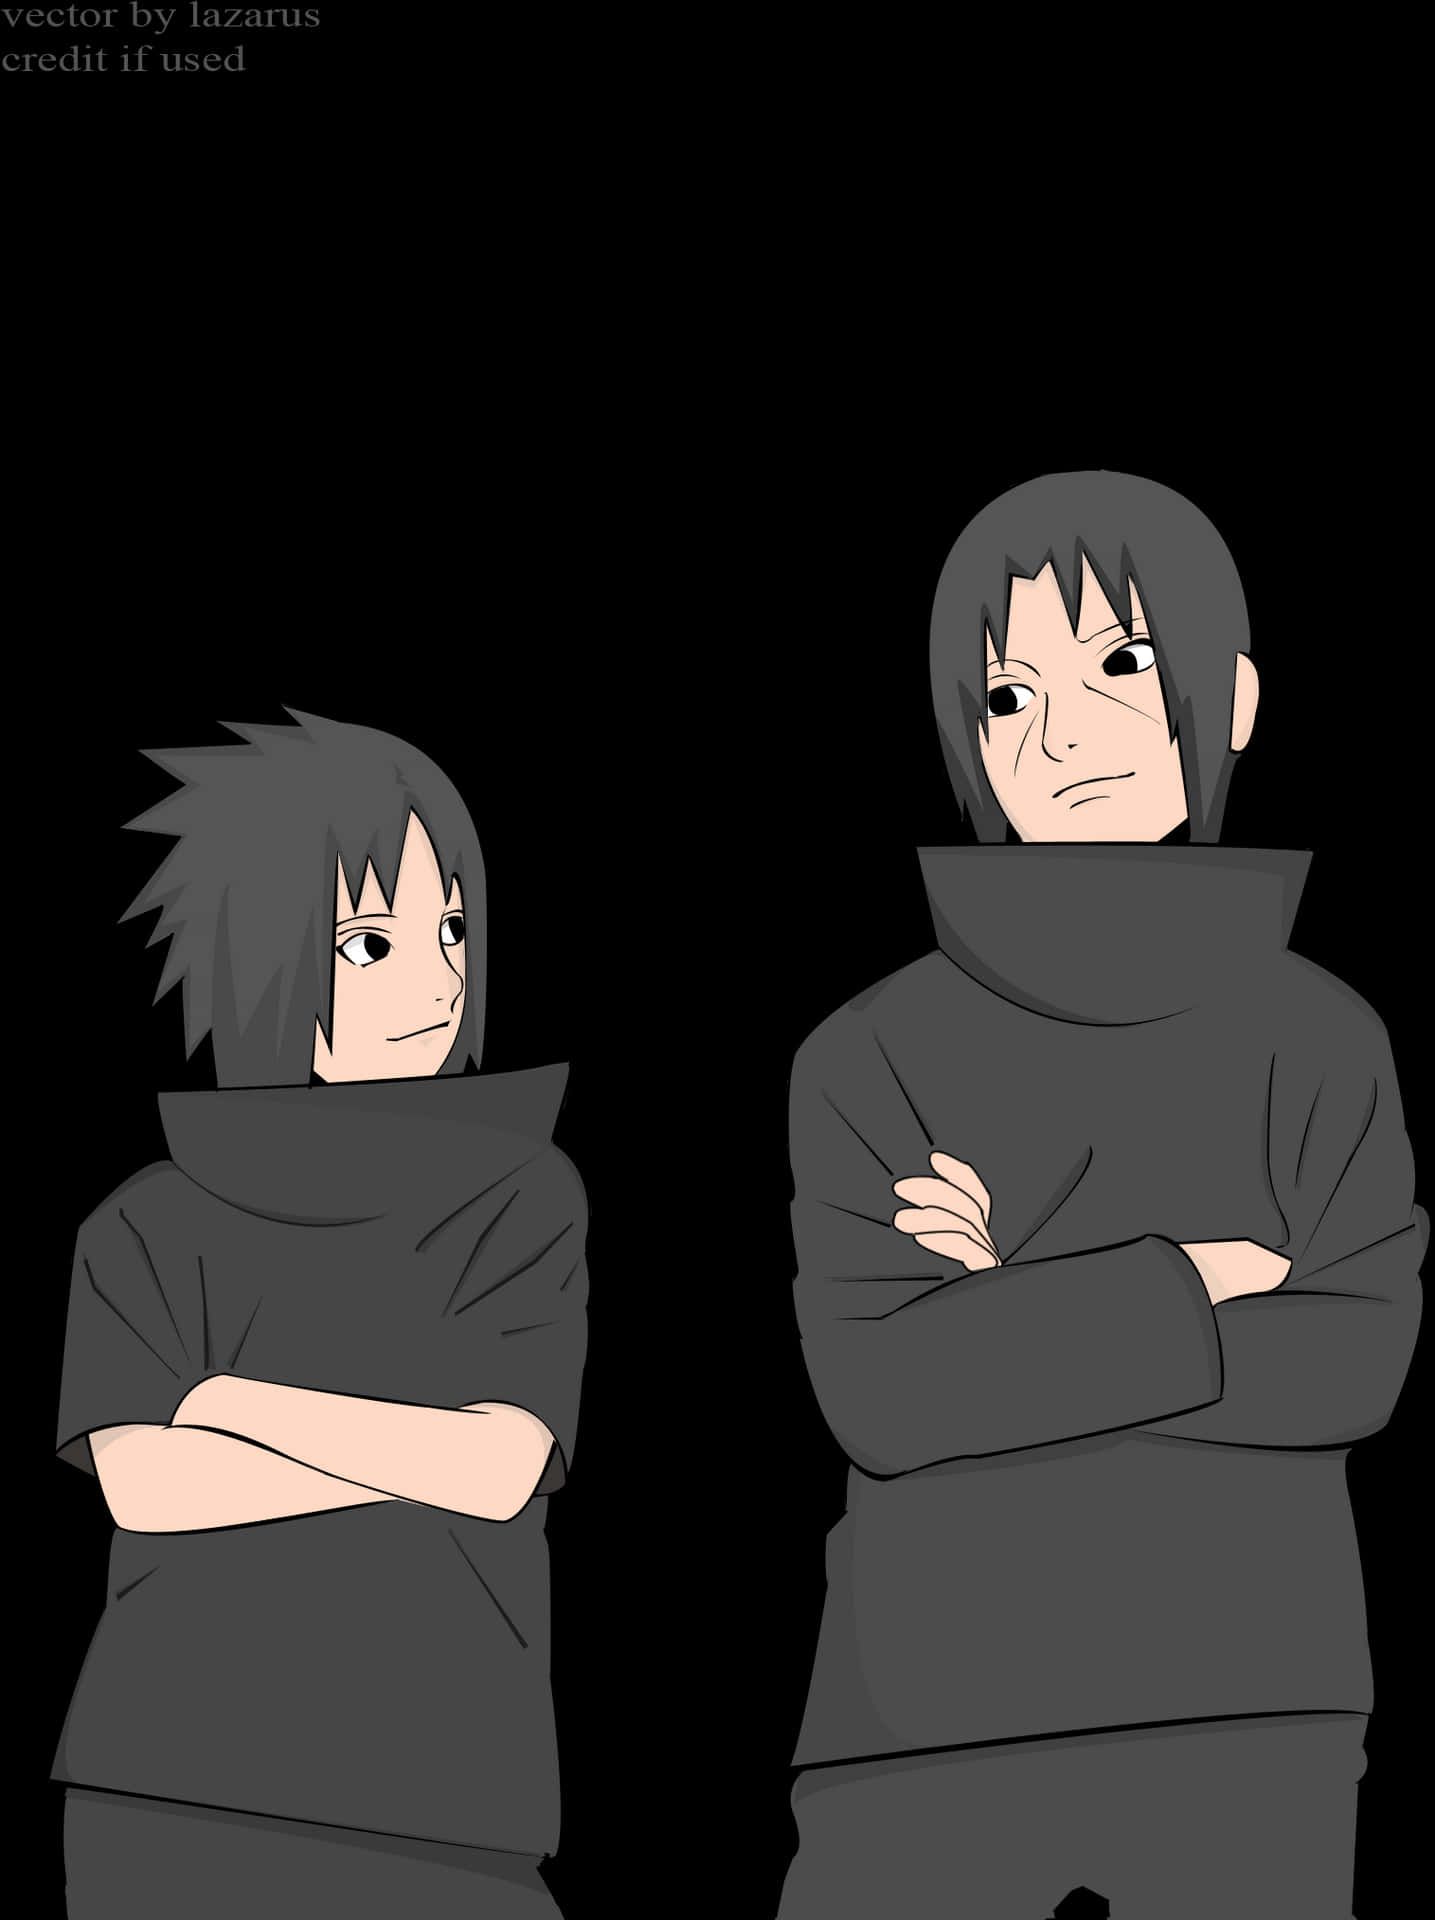 Manga Style Brothers Vector Art PNG image